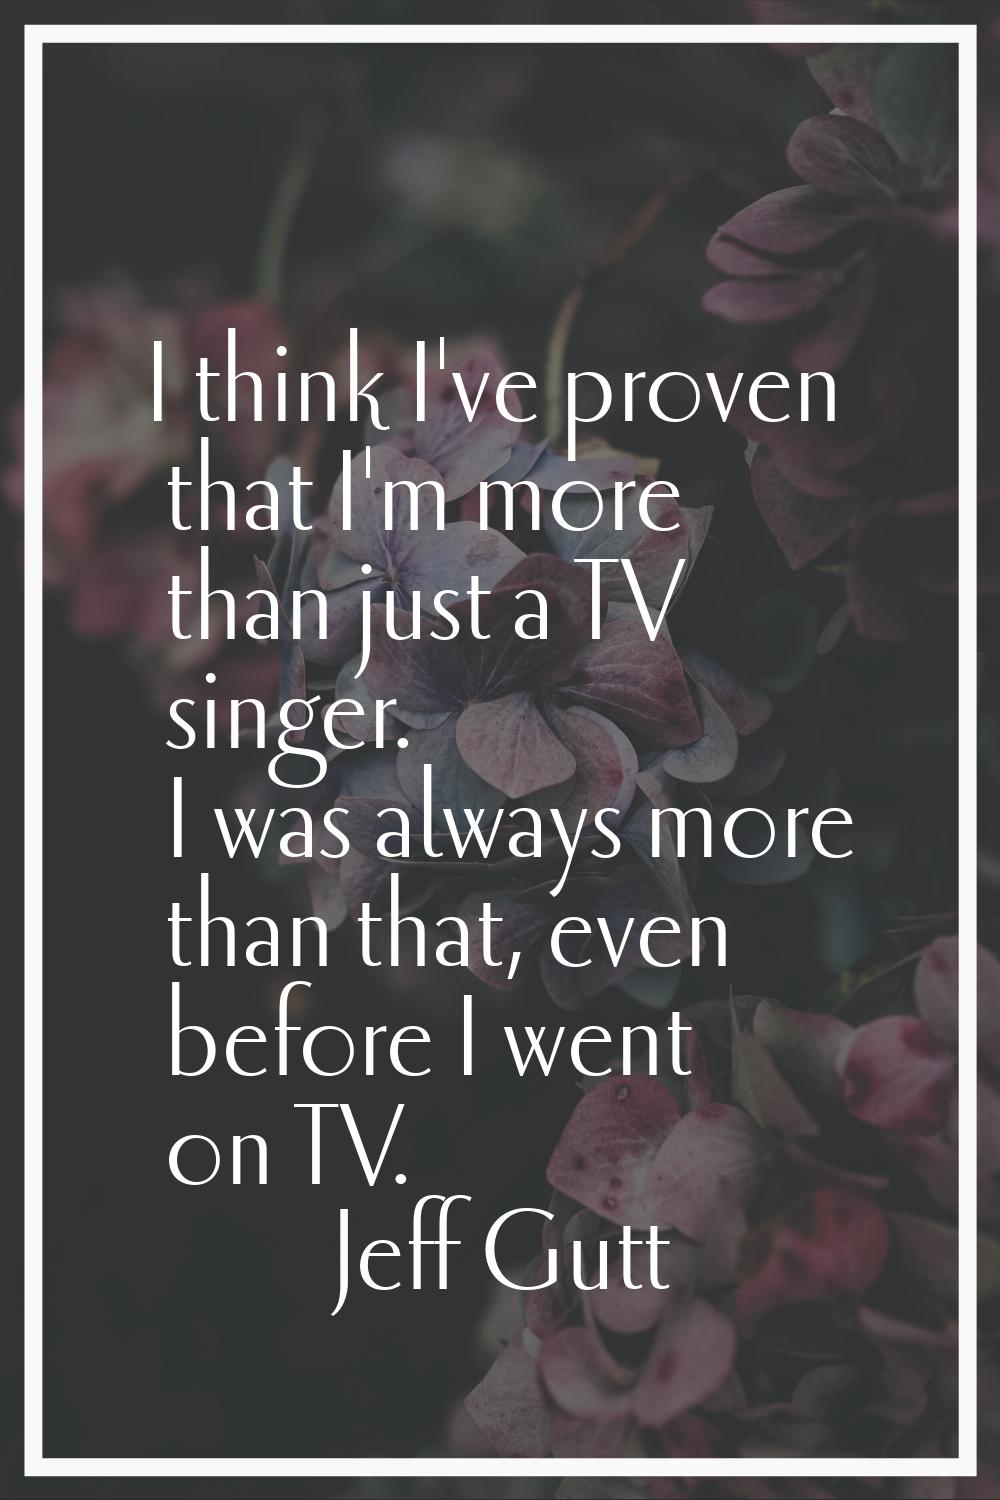 I think I've proven that I'm more than just a TV singer. I was always more than that, even before I